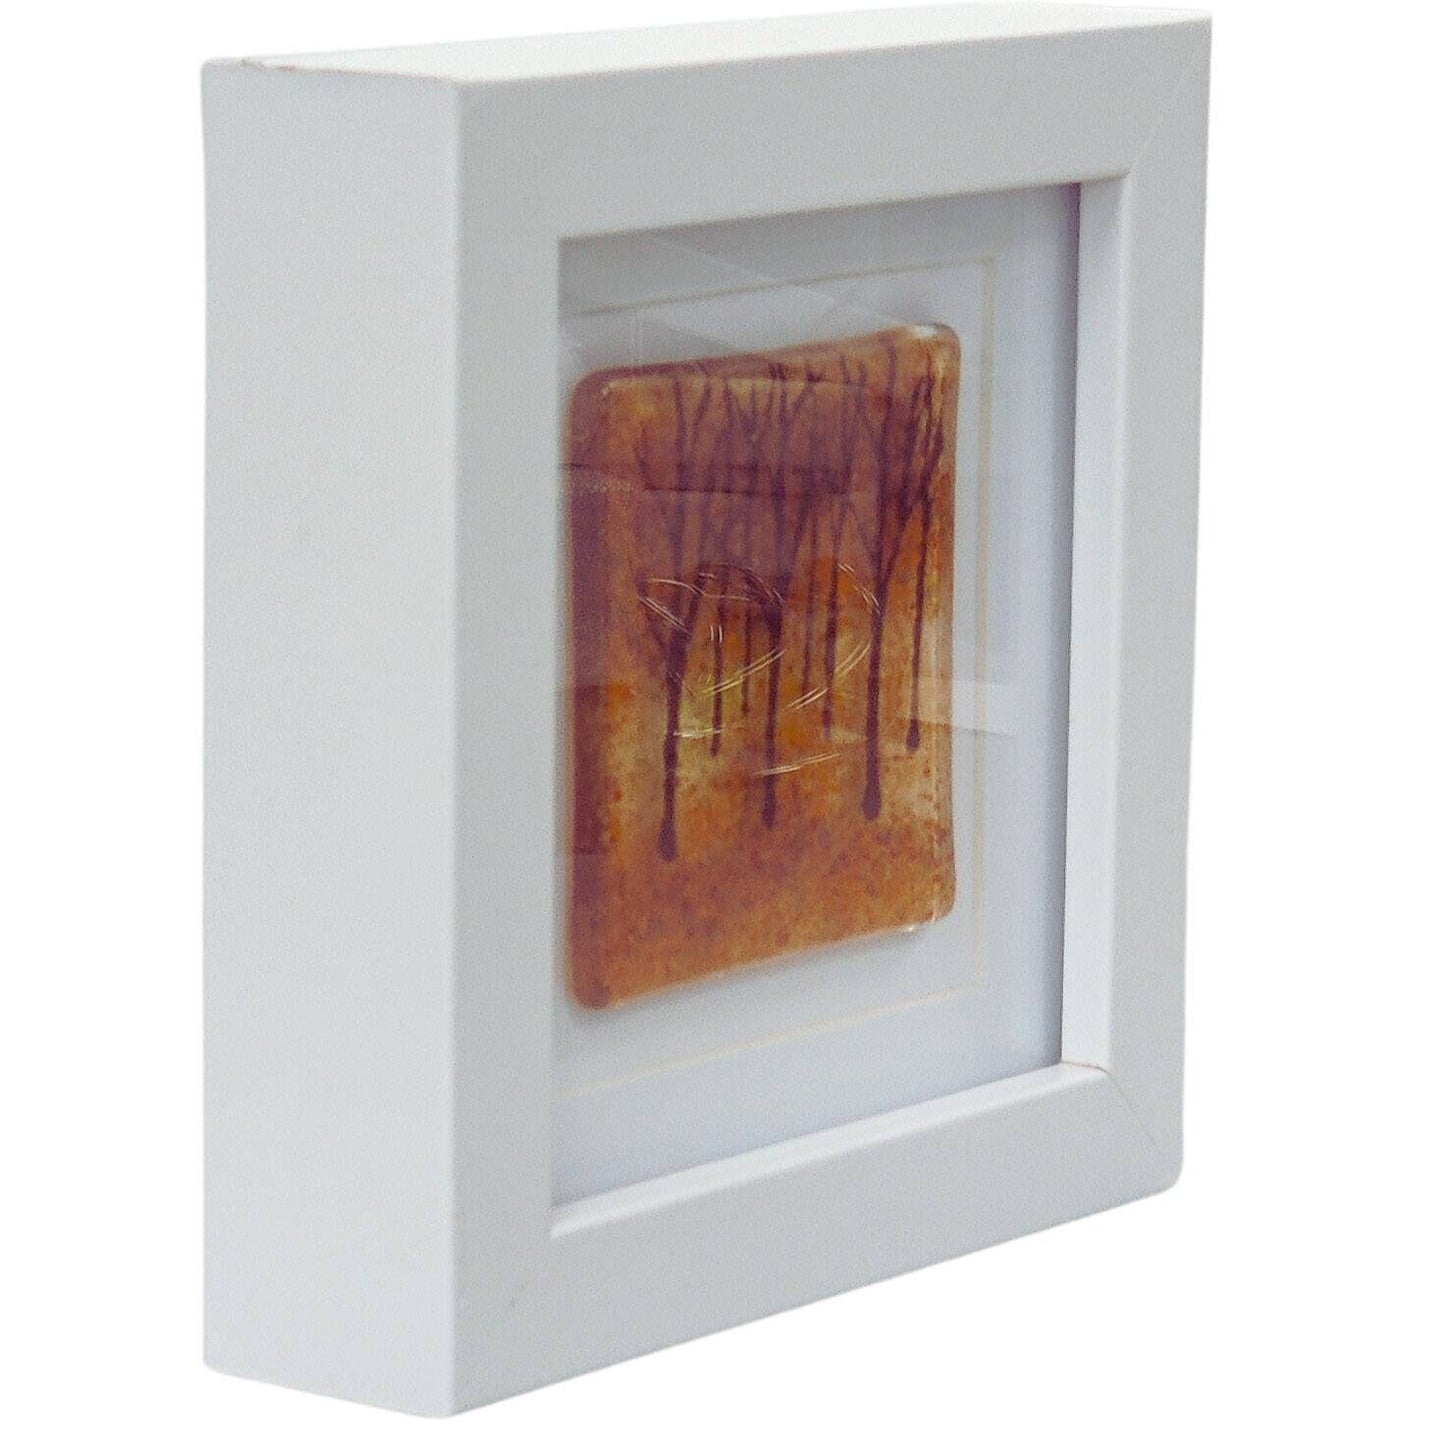 Fused glass small framed picture, mini fused glass art, Autumn forest, fused glass trees picture